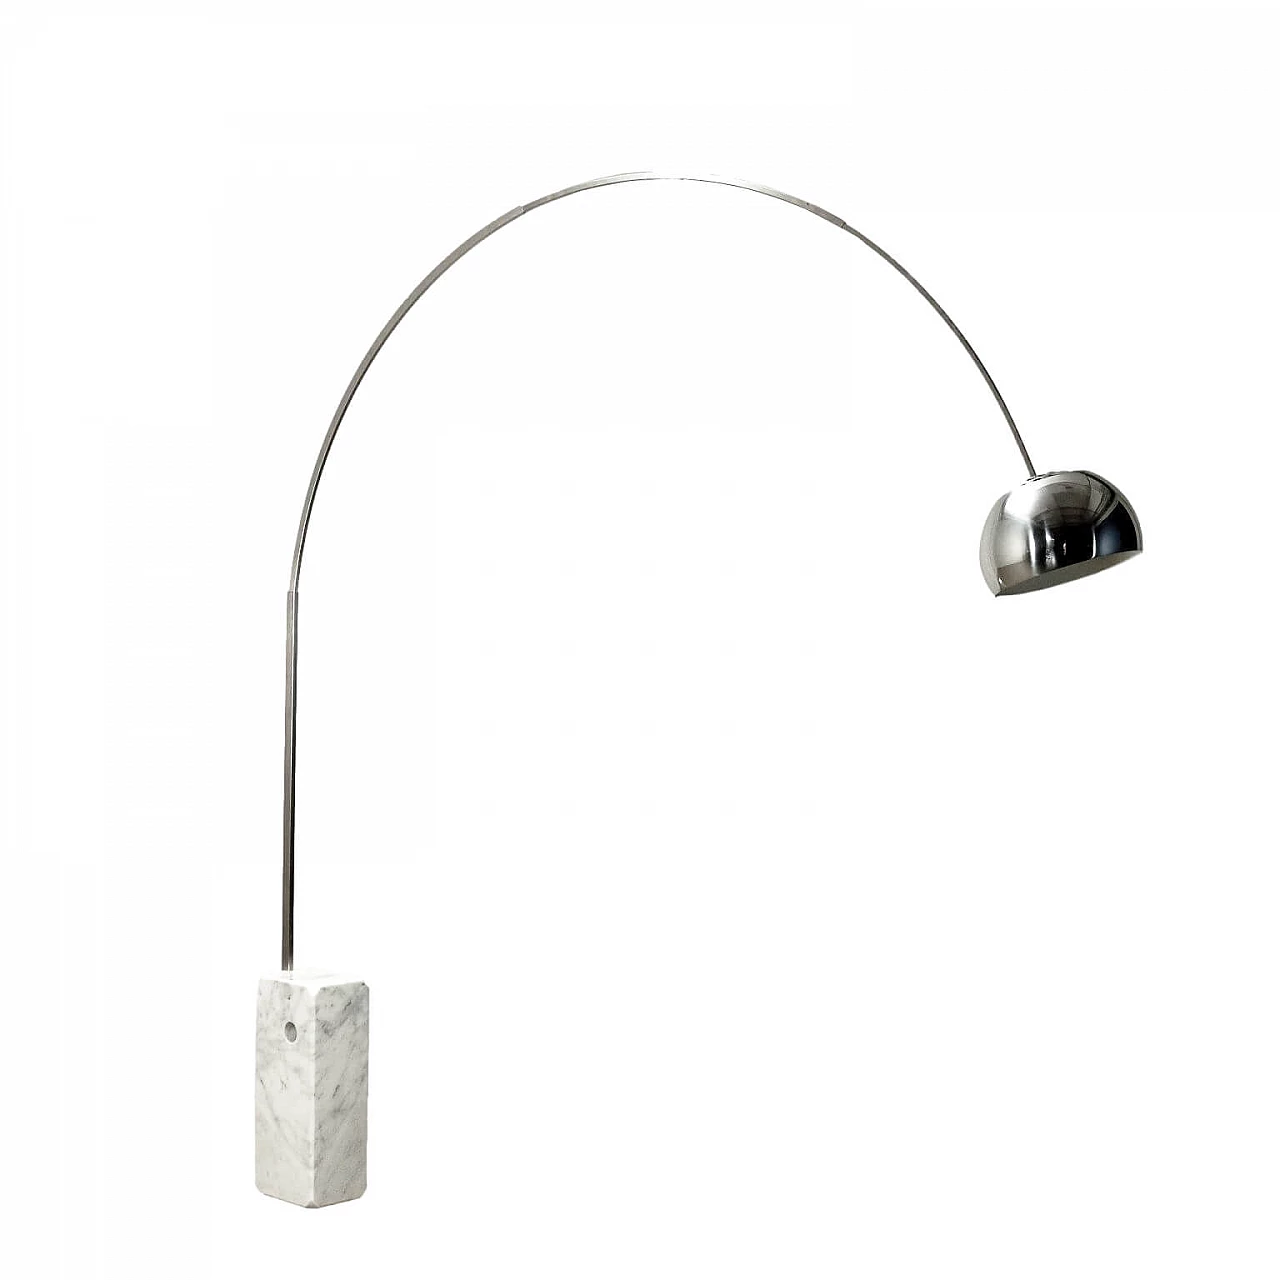 Arco floor lamp by Achille and Pier Giacomo Castiglioni for Flos, 1960s. 1